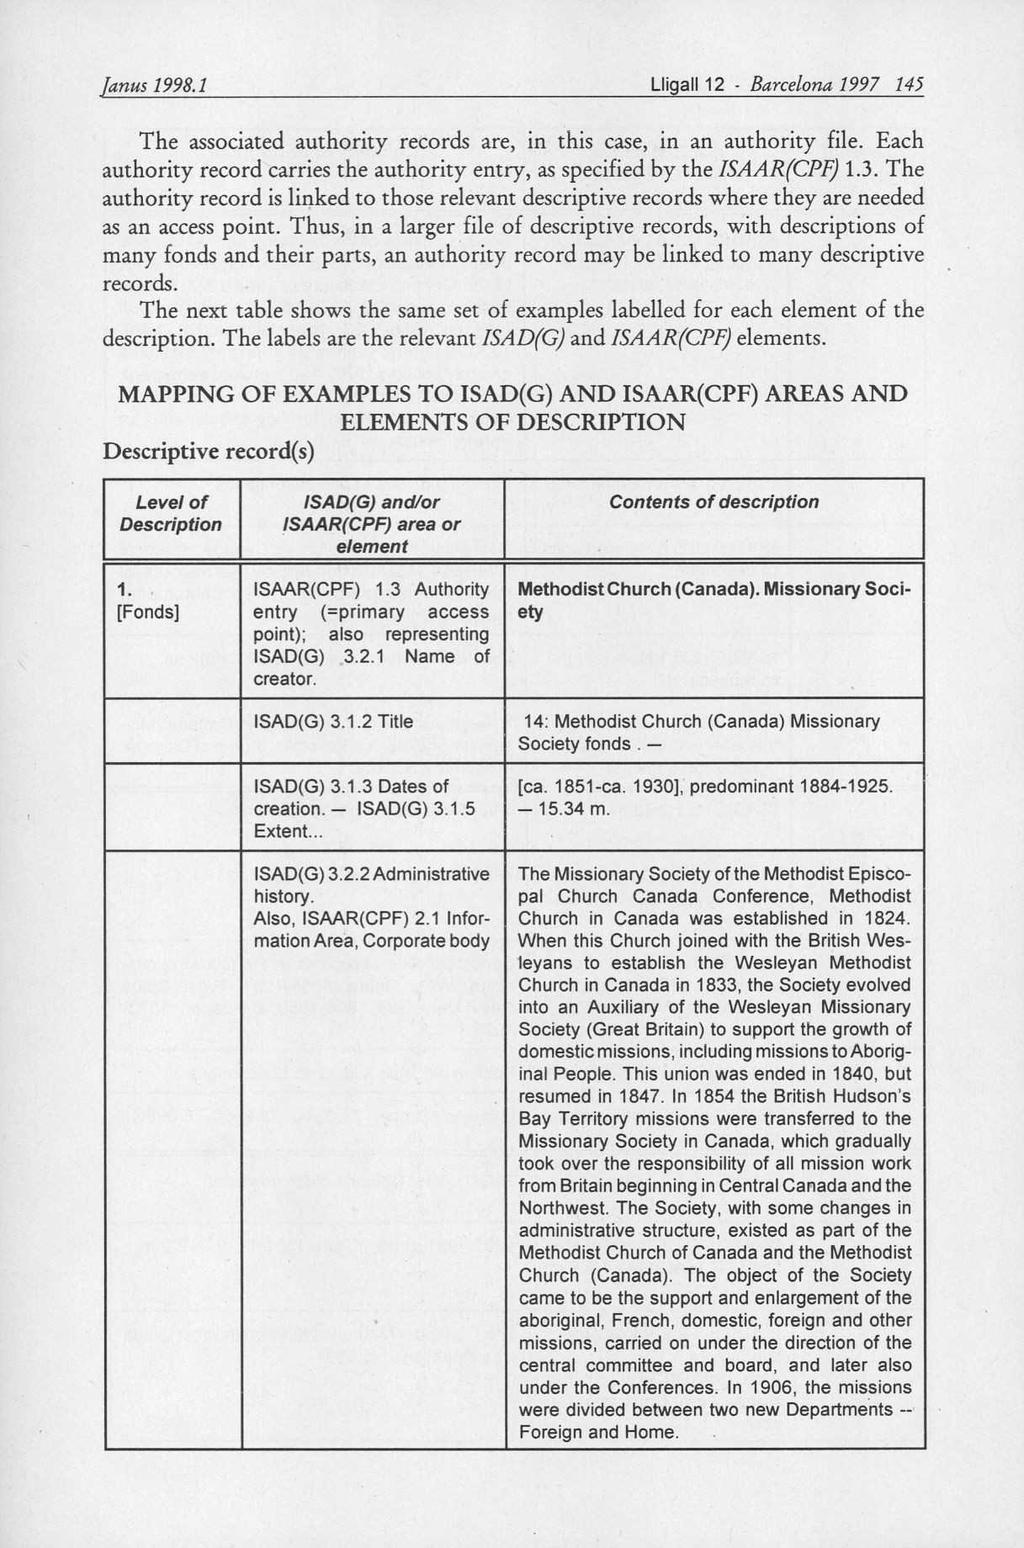 Janus 1998.1 Lligall 12 Barcelona 1997 145 The associated authority records are, in this case, in an authority file.